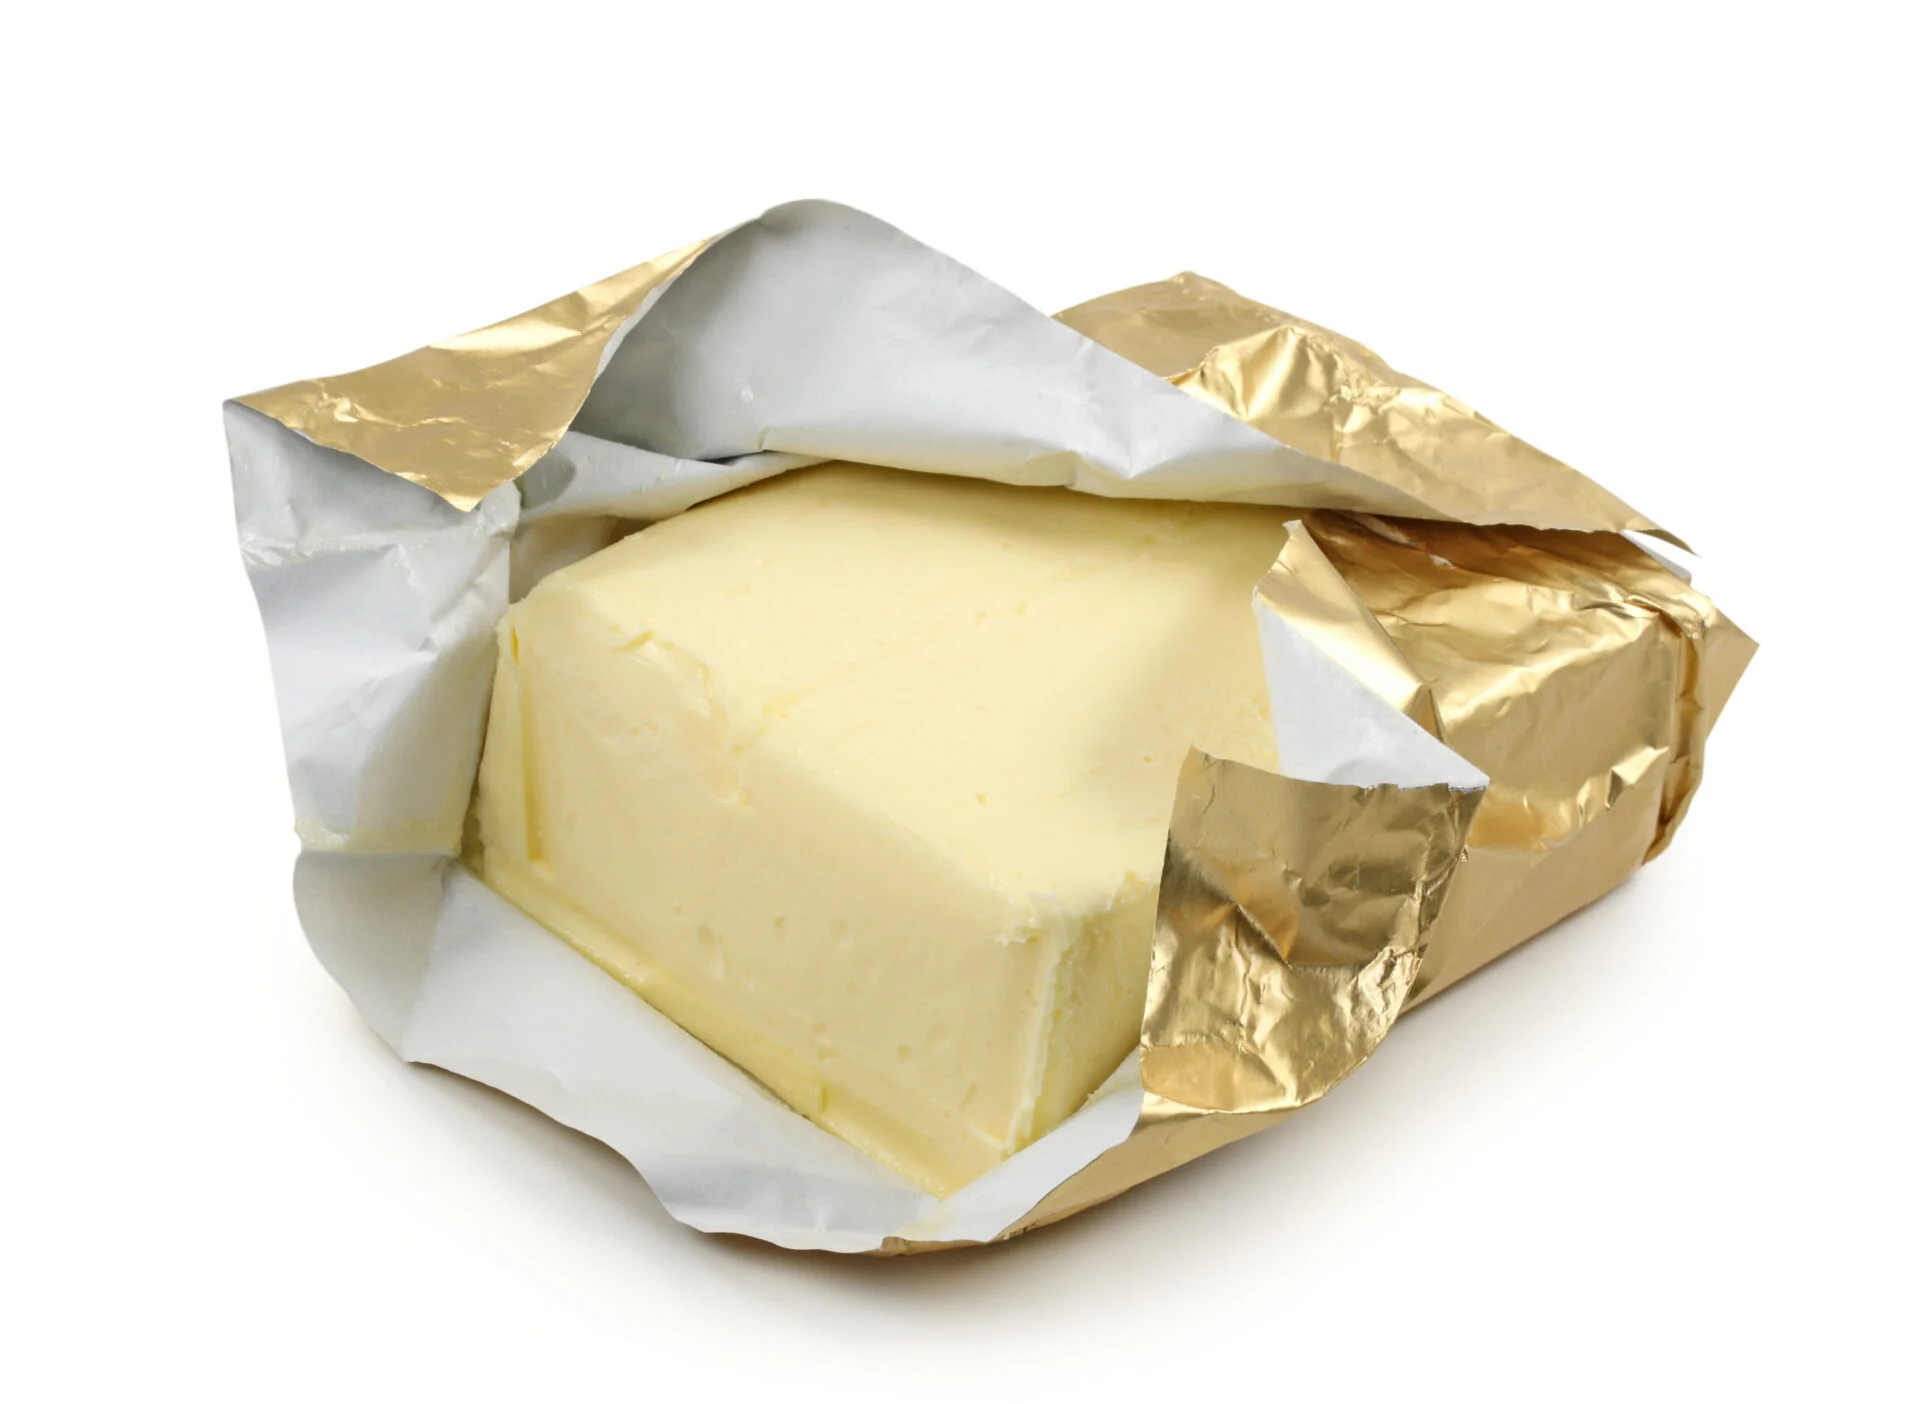 Butter wrapper coming off butter